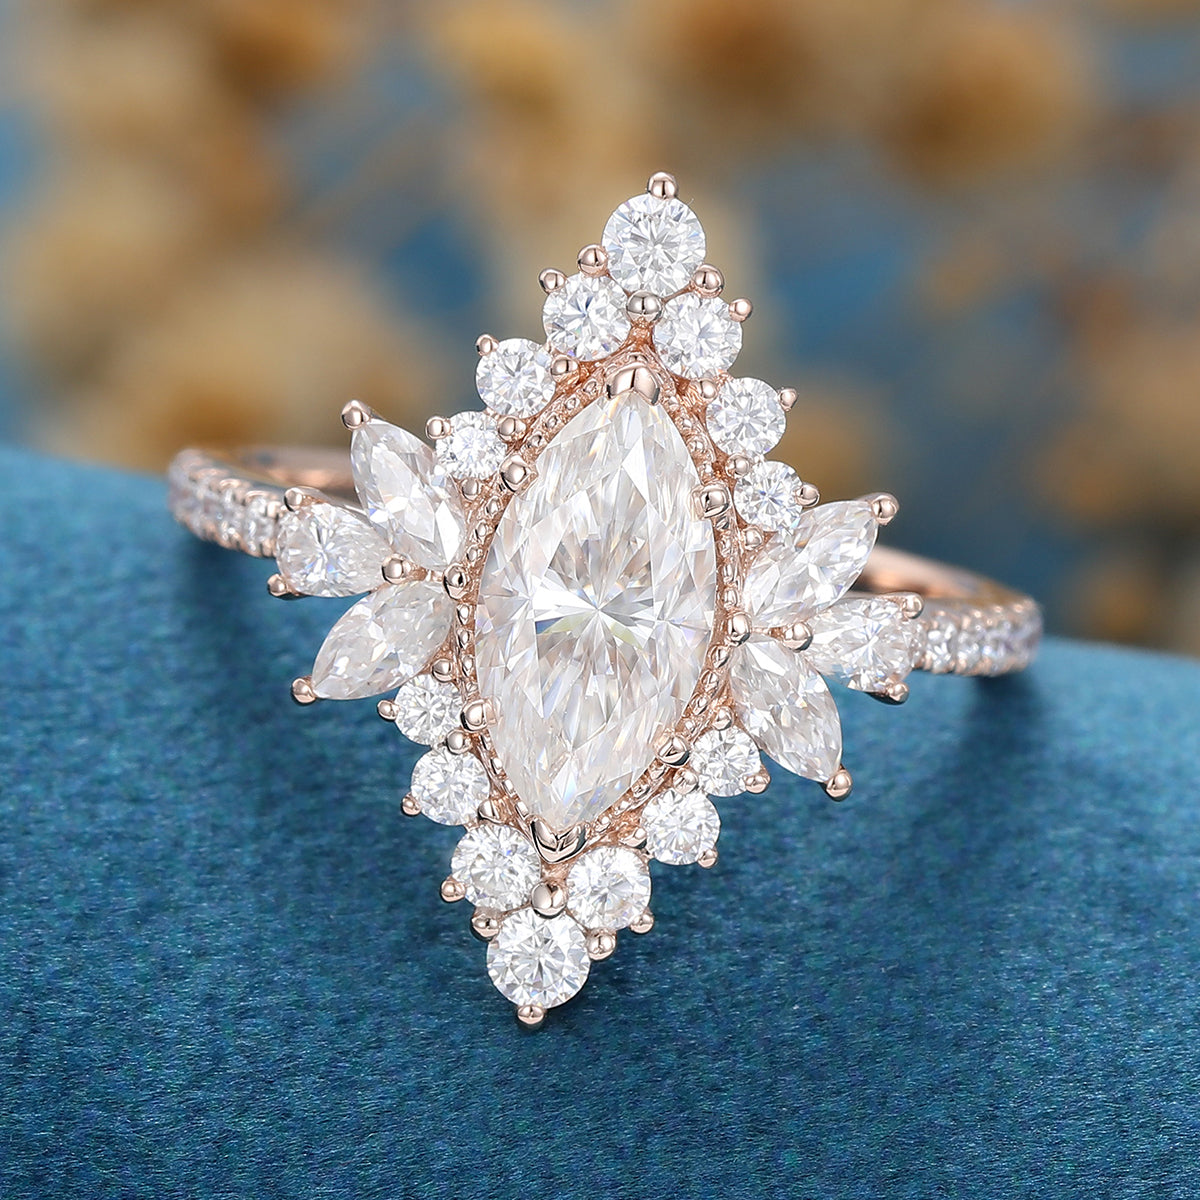 1 Carat Marquise cut Moissanite Halo Cluster Engagement Ring